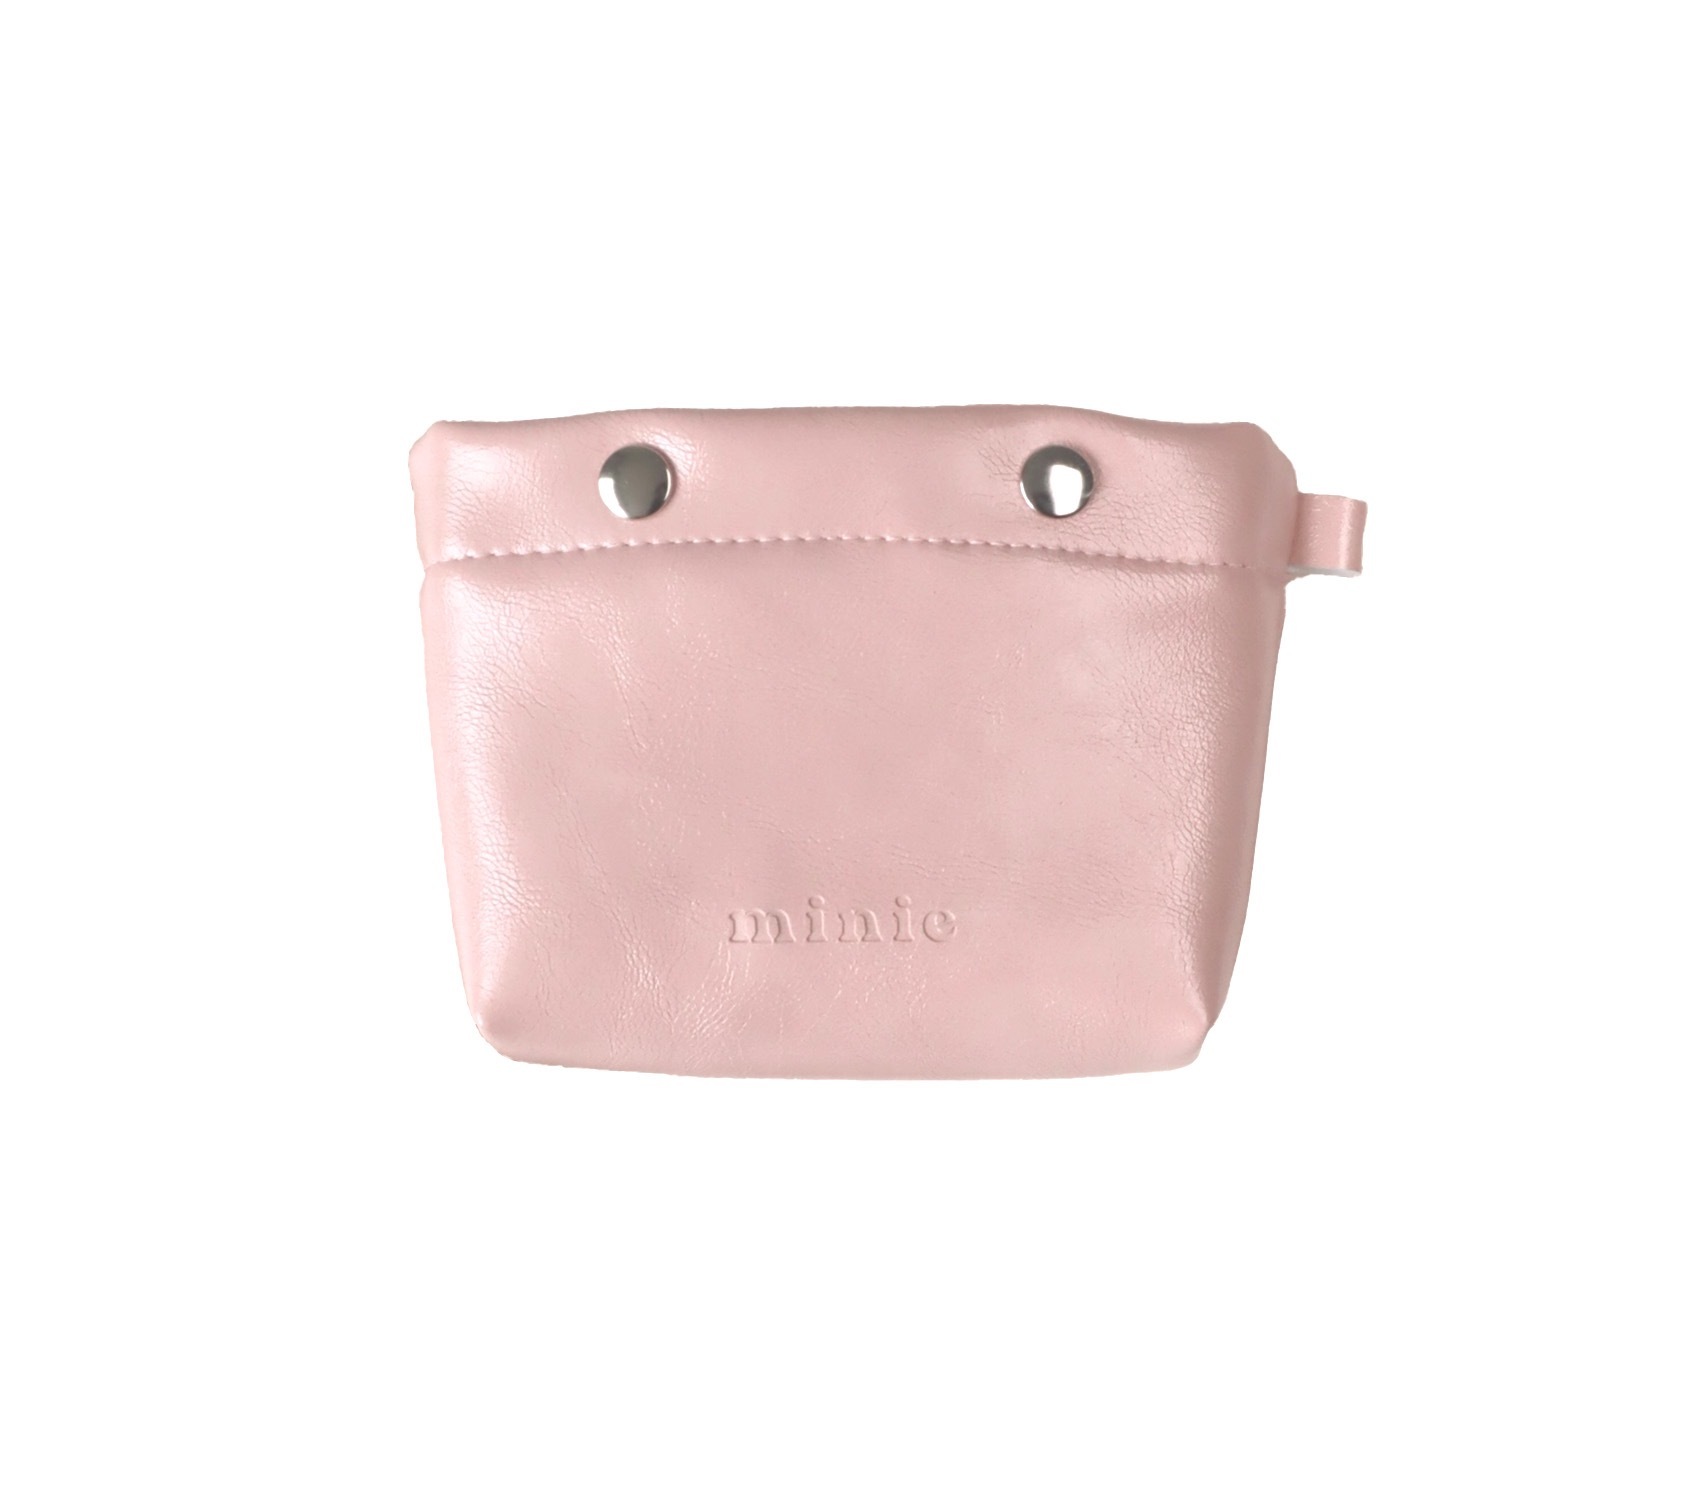 cooing wallet - pink